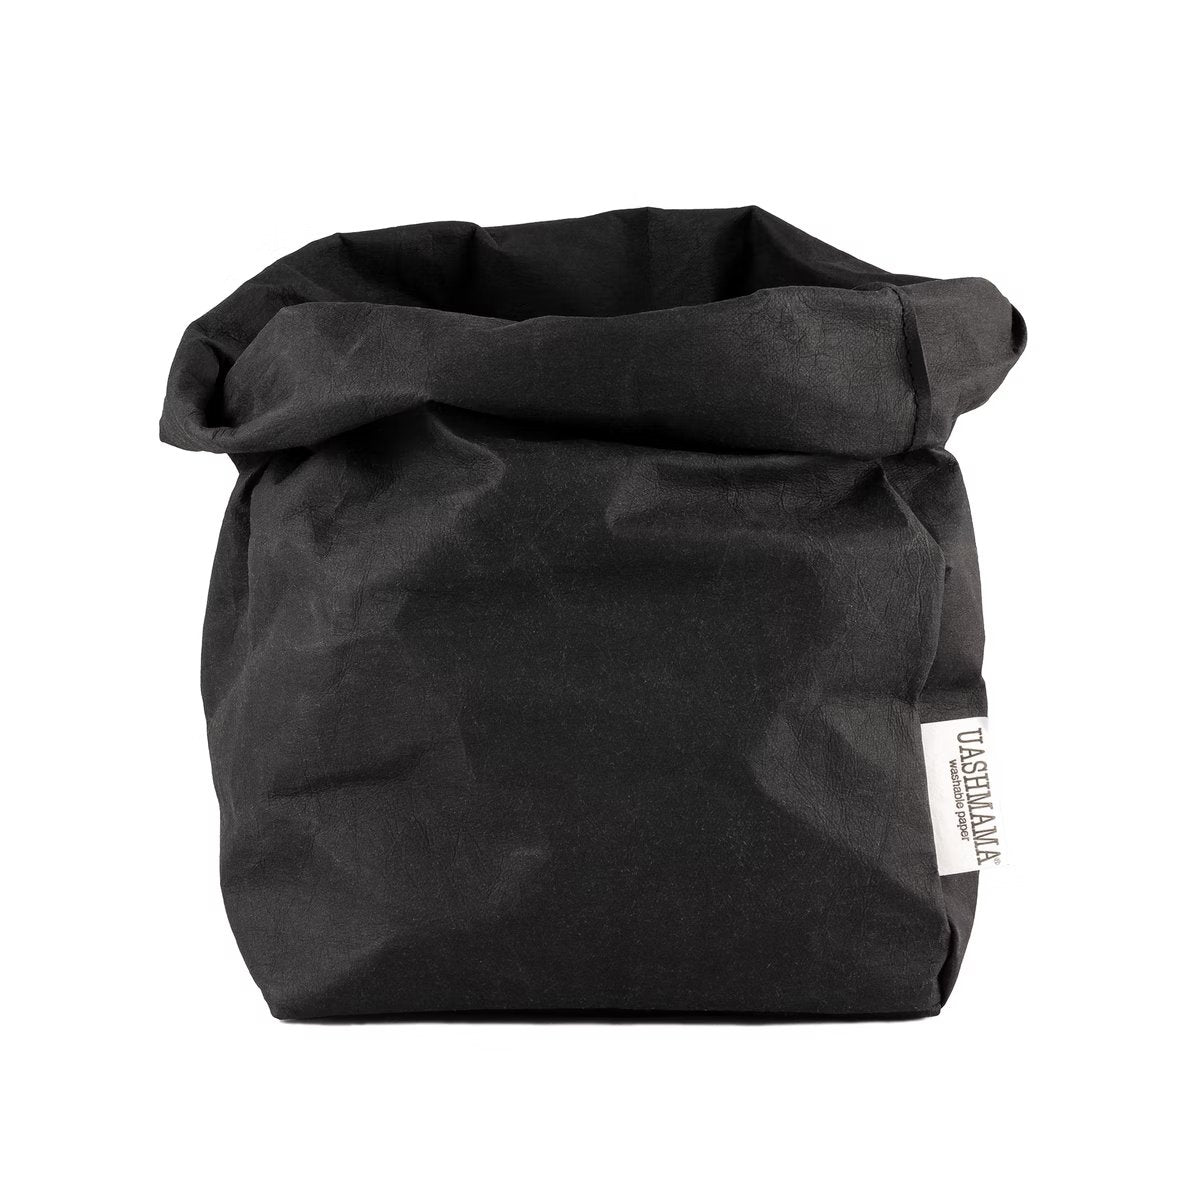 A washable paper bag is shown. The bag is rolled down at the top and features a UASHMAMA logo label on the bottom left corner. The bag pictured is the large plus size in black.